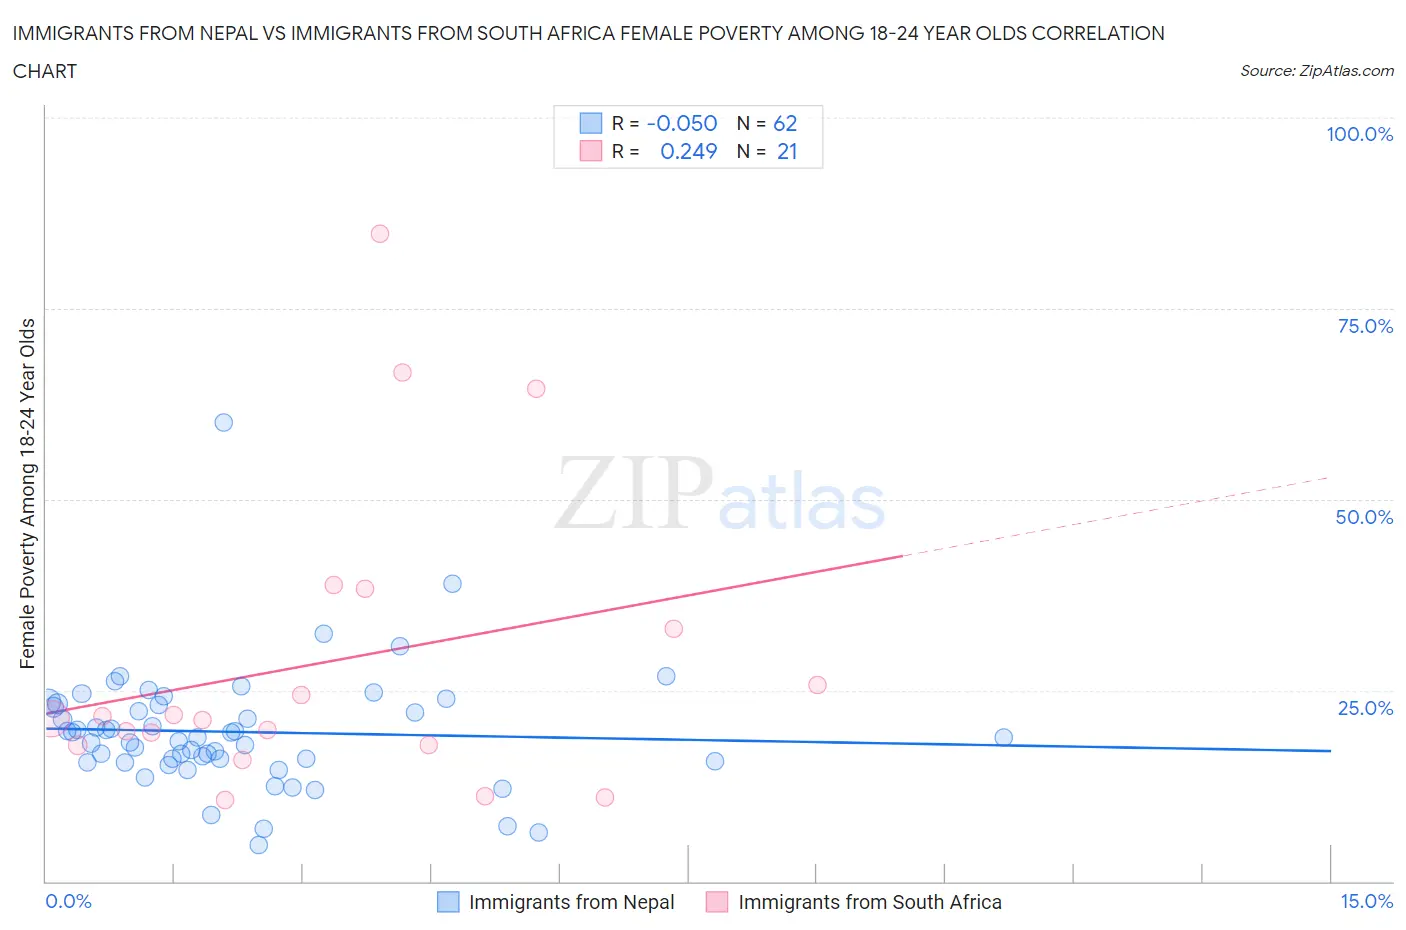 Immigrants from Nepal vs Immigrants from South Africa Female Poverty Among 18-24 Year Olds